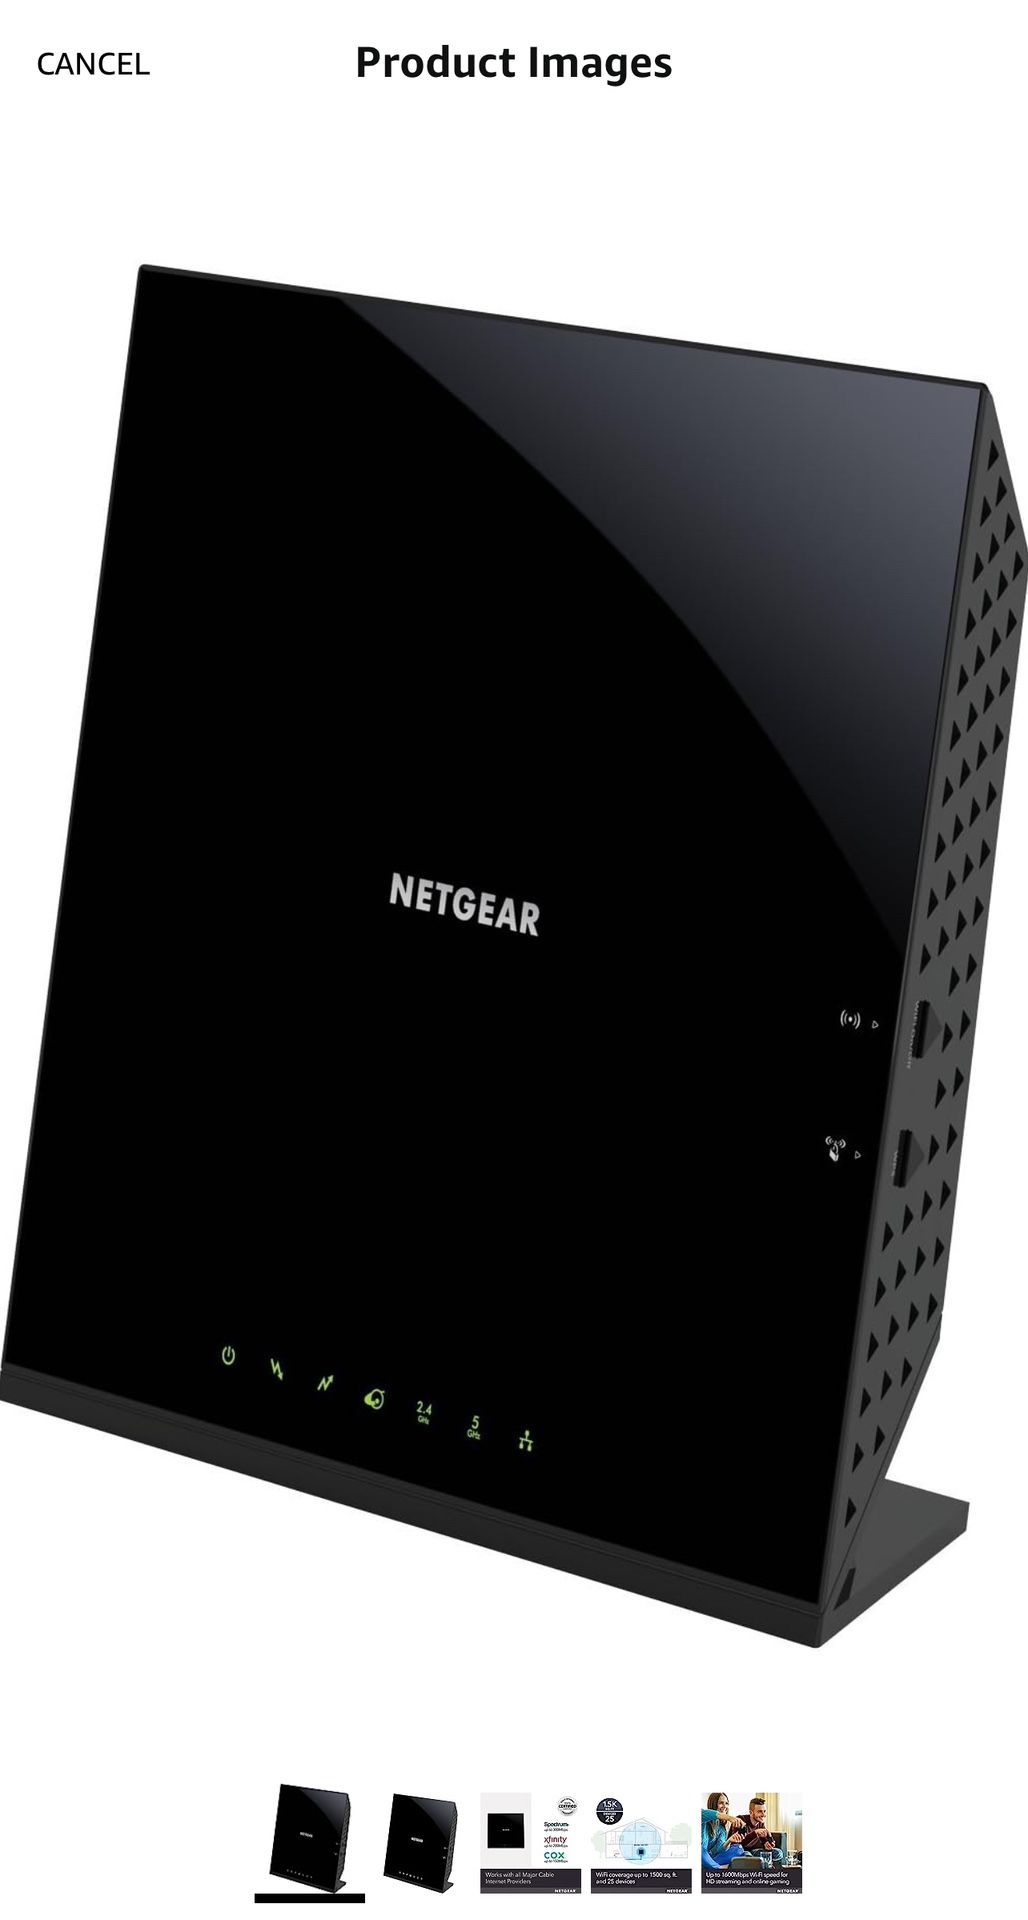 NETGEAR Cable Modem Router Combo dual band C6250 - Compatible with All Cable Providers